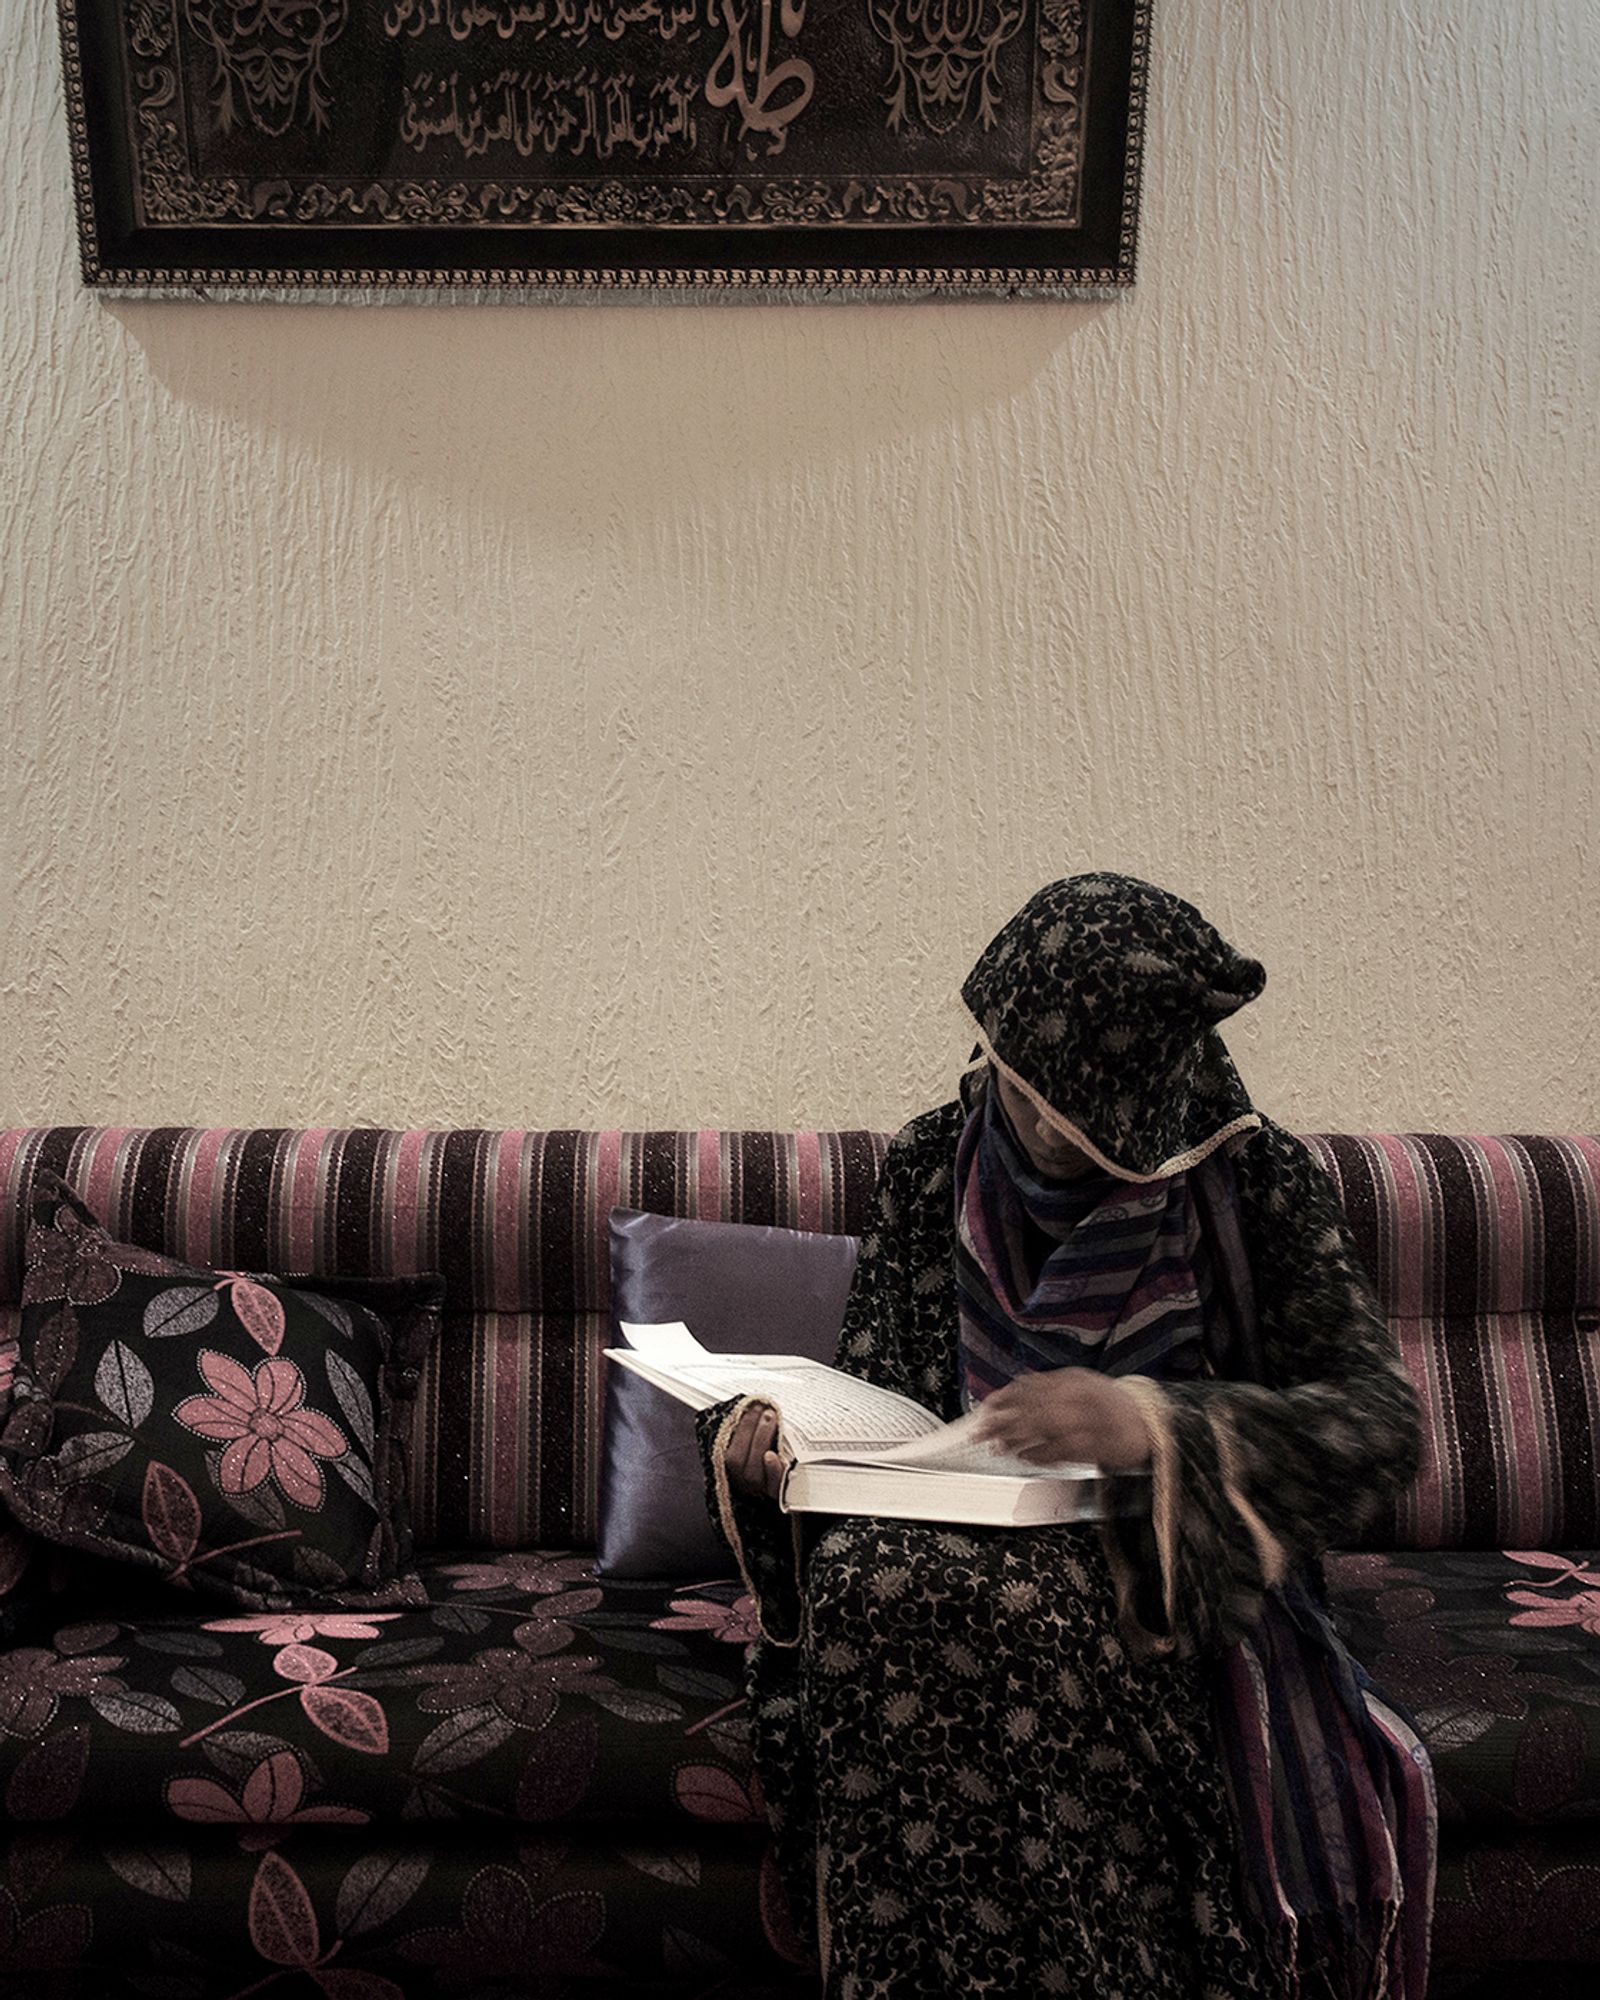 © Enrico Doria - Nihed, while is reading the Koran